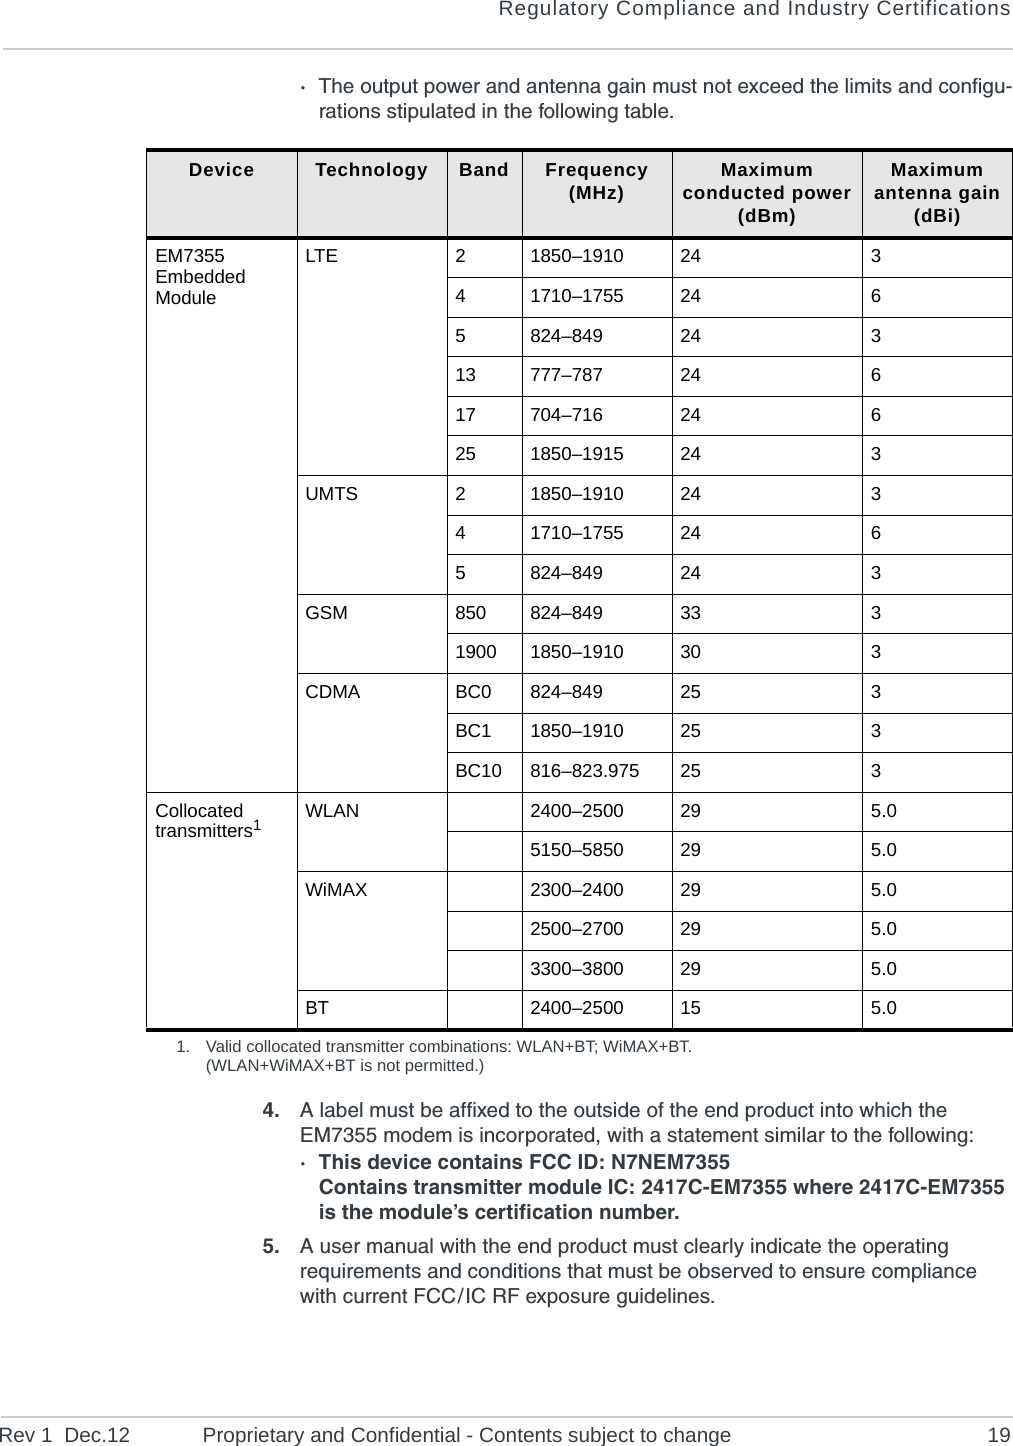 Regulatory Compliance and Industry CertificationsRev 1  Dec.12 Proprietary and Confidential - Contents subject to change 19·The output power and antenna gain must not exceed the limits and configu-rations stipulated in the following table.4. A label must be affixed to the outside of the end product into which the EM7355 modem is incorporated, with a statement similar to the following:· This device contains FCC ID: N7NEM7355Contains transmitter module IC: 2417C-EM7355 where 2417C-EM7355 is the module’s certification number.5. A user manual with the end product must clearly indicate the operating requirements and conditions that must be observed to ensure compliance with current FCC / IC RF exposure guidelines.Device Technology Band Frequency(MHz) Maximum conducted power(dBm)Maximum antenna gain(dBi)EM7355 Embedded ModuleLTE 21850–1910 24 341710–1755 24 65824–849 24 313 777–787 24 617 704–716 24 625 1850–1915 24 3UMTS 21850–1910 24 341710–1755 24 65824–849 24 3GSM 850 824–849 33 31900 1850–1910 30 3CDMA BC0 824–849 25 3BC1 1850–1910 25 3BC10 816–823.975 25 3Collocated transmitters1WLAN 2400–2500 29 5.05150–5850 29 5.0WiMAX 2300–2400 29 5.02500–2700 29 5.03300–3800 29 5.0BT 2400–2500 15 5.01. Valid collocated transmitter combinations: WLAN+BT; WiMAX+BT.(WLAN+WiMAX+BT is not permitted.)